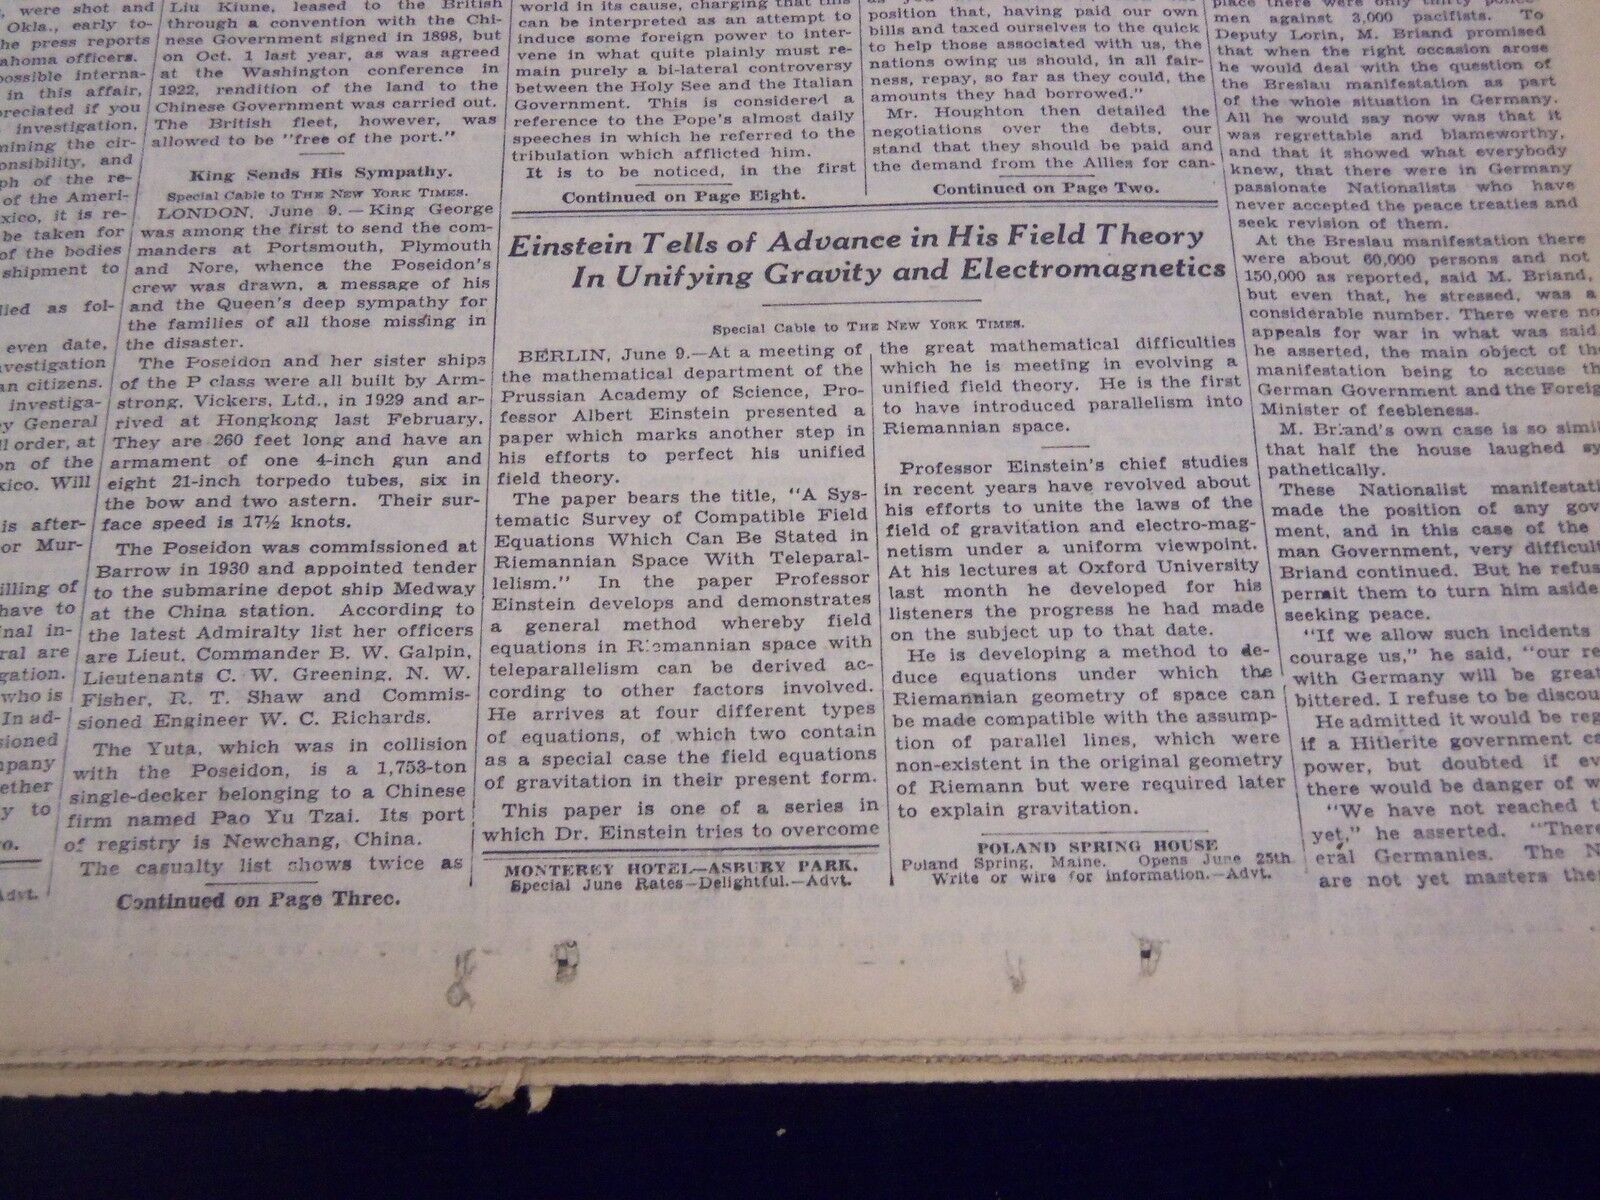 1931 JUNE 10 NEW YORK TIMES - EINSTEIN TELLS OF ADVANCE IN FIELD THEORY- NT 2200